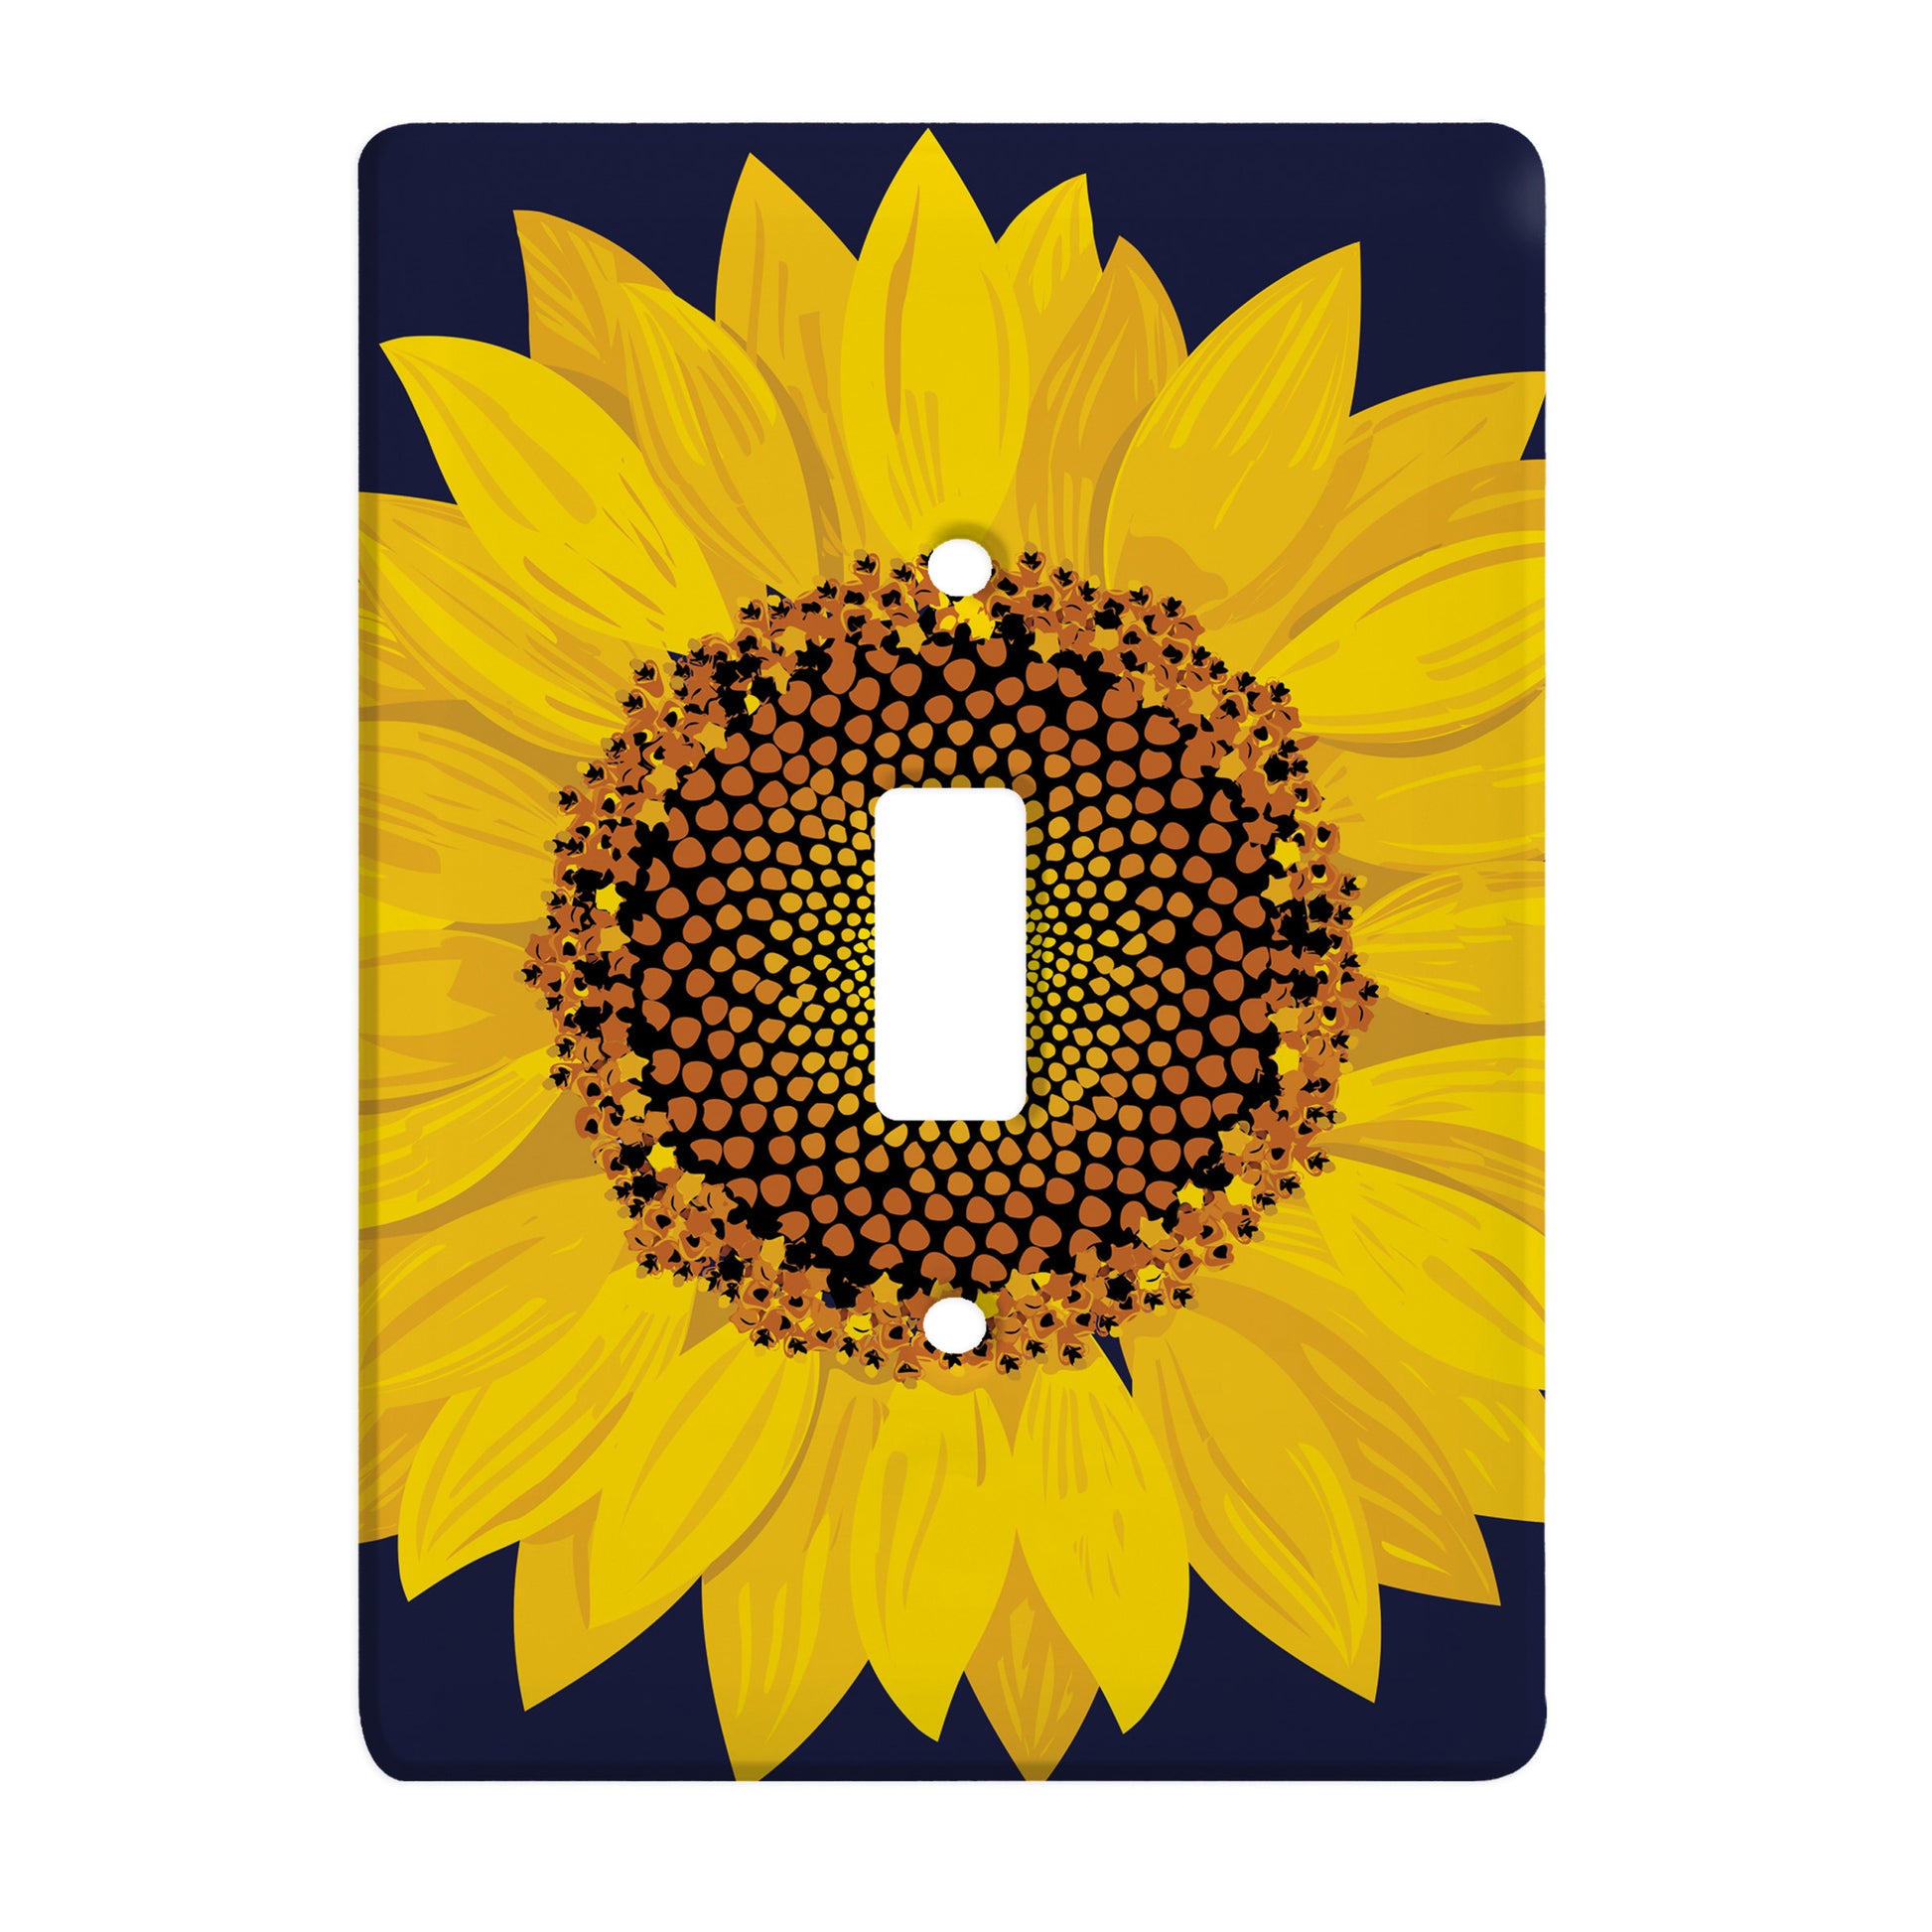 navy ceramic single toggle switch plate featuring a yellow sunflower. 